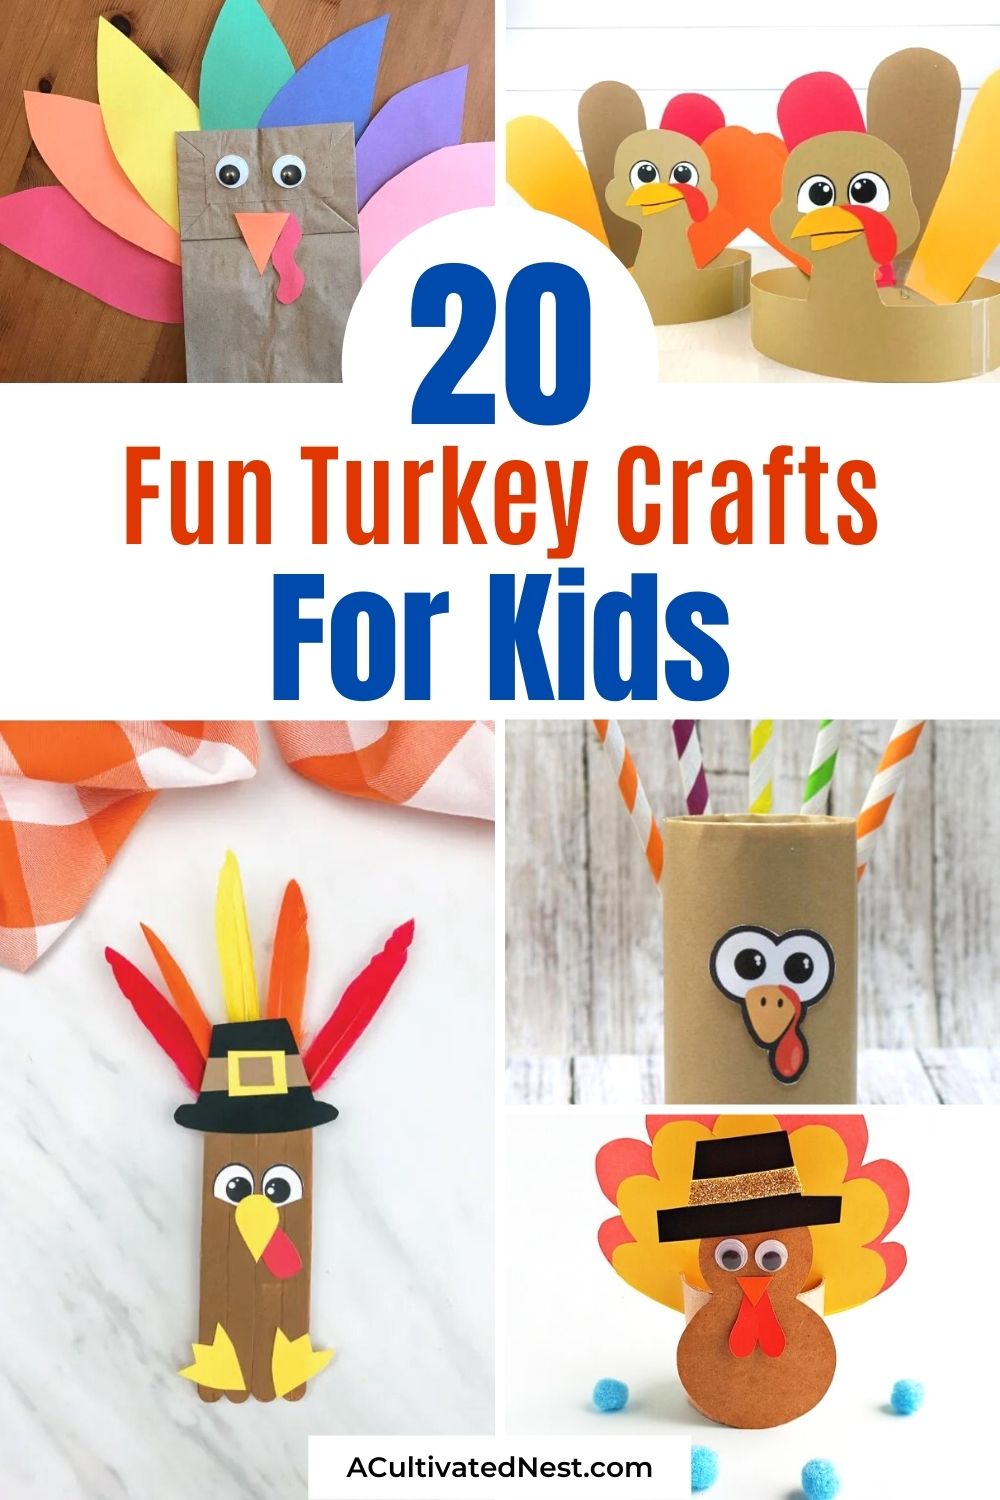 20 Fun Turkey Kids Crafts- Get your kids in the Thanksgiving mood and make memories at the same time with these 20 turkey crafts for kids! There are so many fun turkey-themed kids crafts that they are sure to enjoy! | Thanksgiving kids crafts, #ThanksgivingCrafts #kidsCrafts #kidsActivities #turkeyCrafts #ACultivatedNest